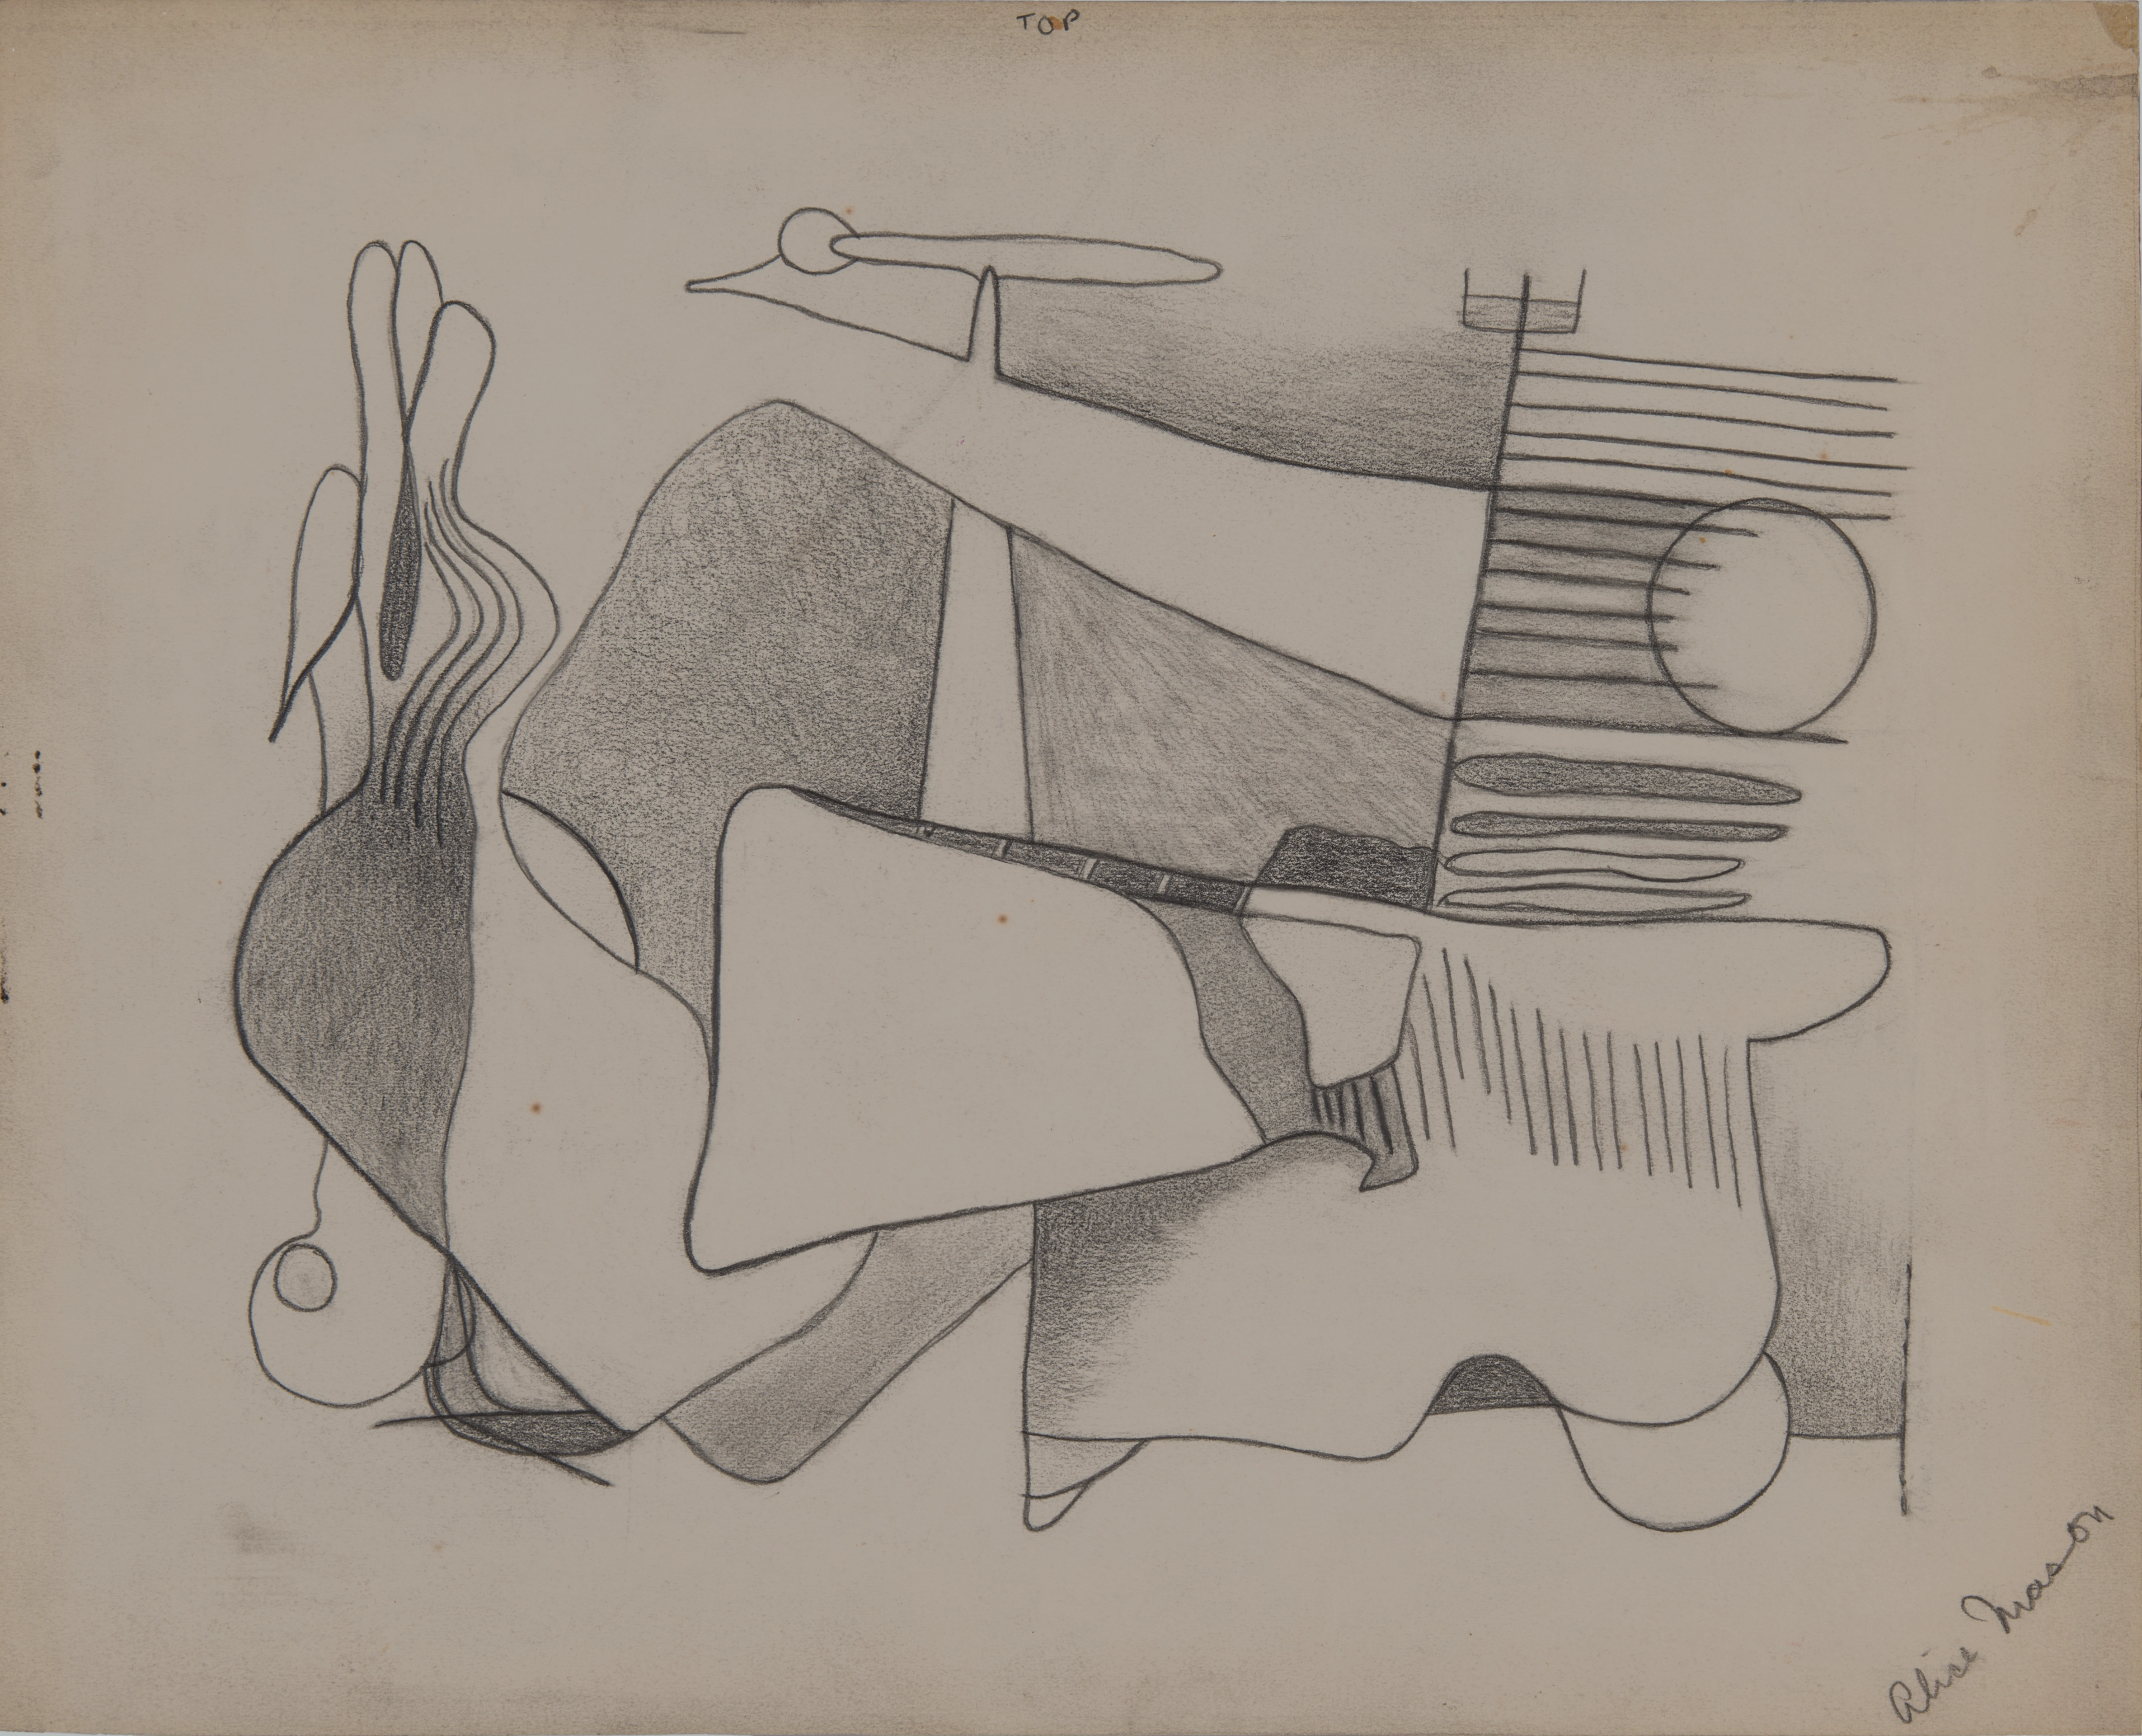 Abstract drawing with graphite on paper, comprised of lines and biomorphic forms, with some shading in areas which creates depth.